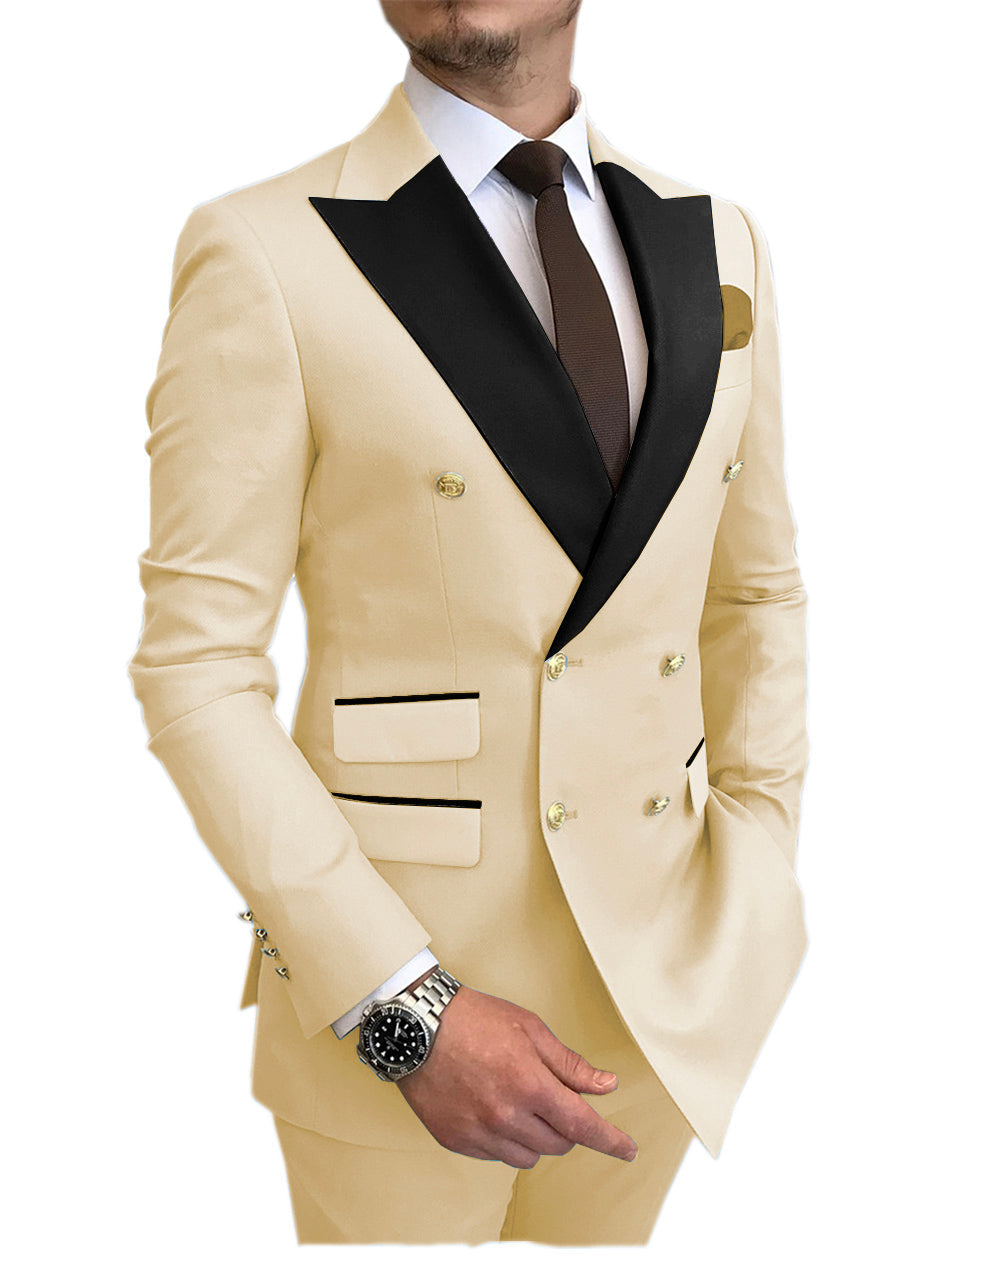 Casual Men's Suit Slim Fit Double Breasted 2 Piece Business Tuxedos (Blazer+Pants) mens event wear